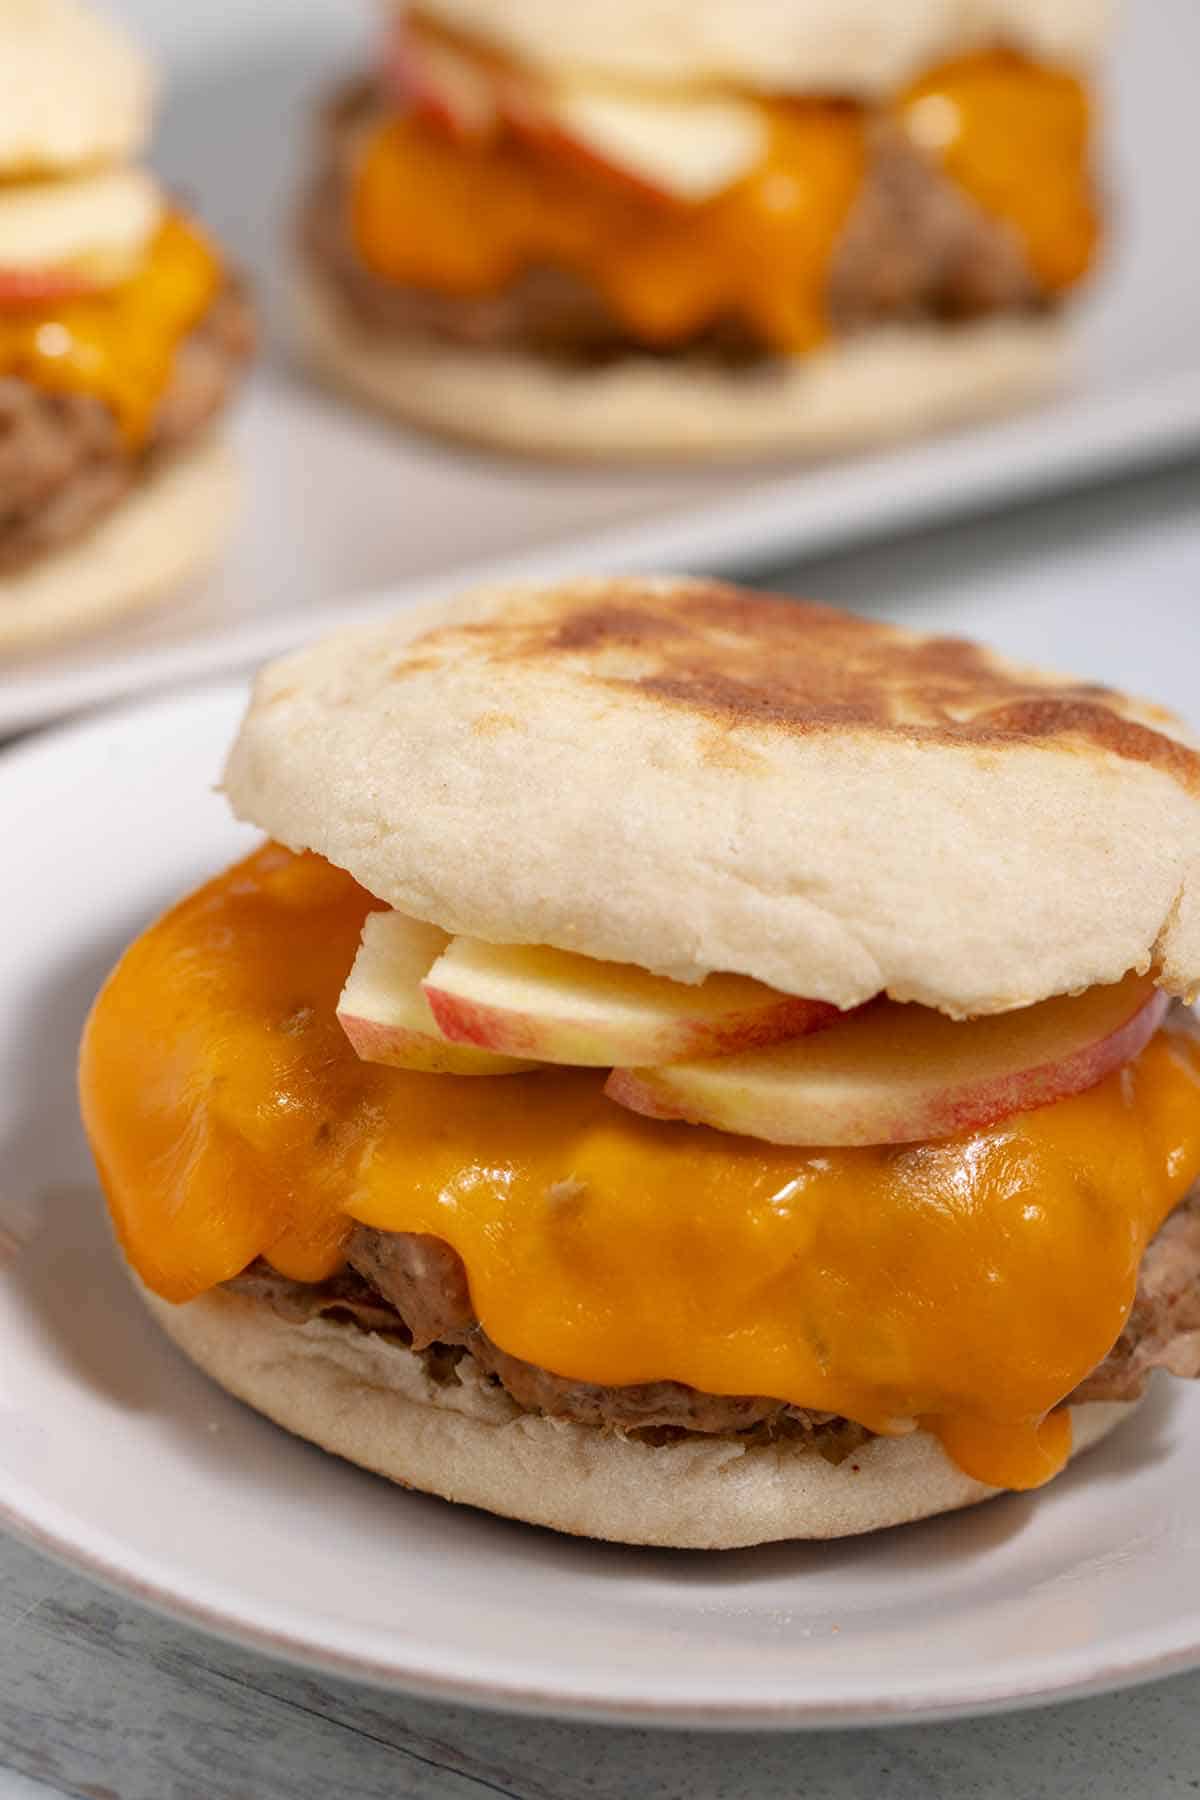 Cheesy turkey burger served on a toasted English muffin.